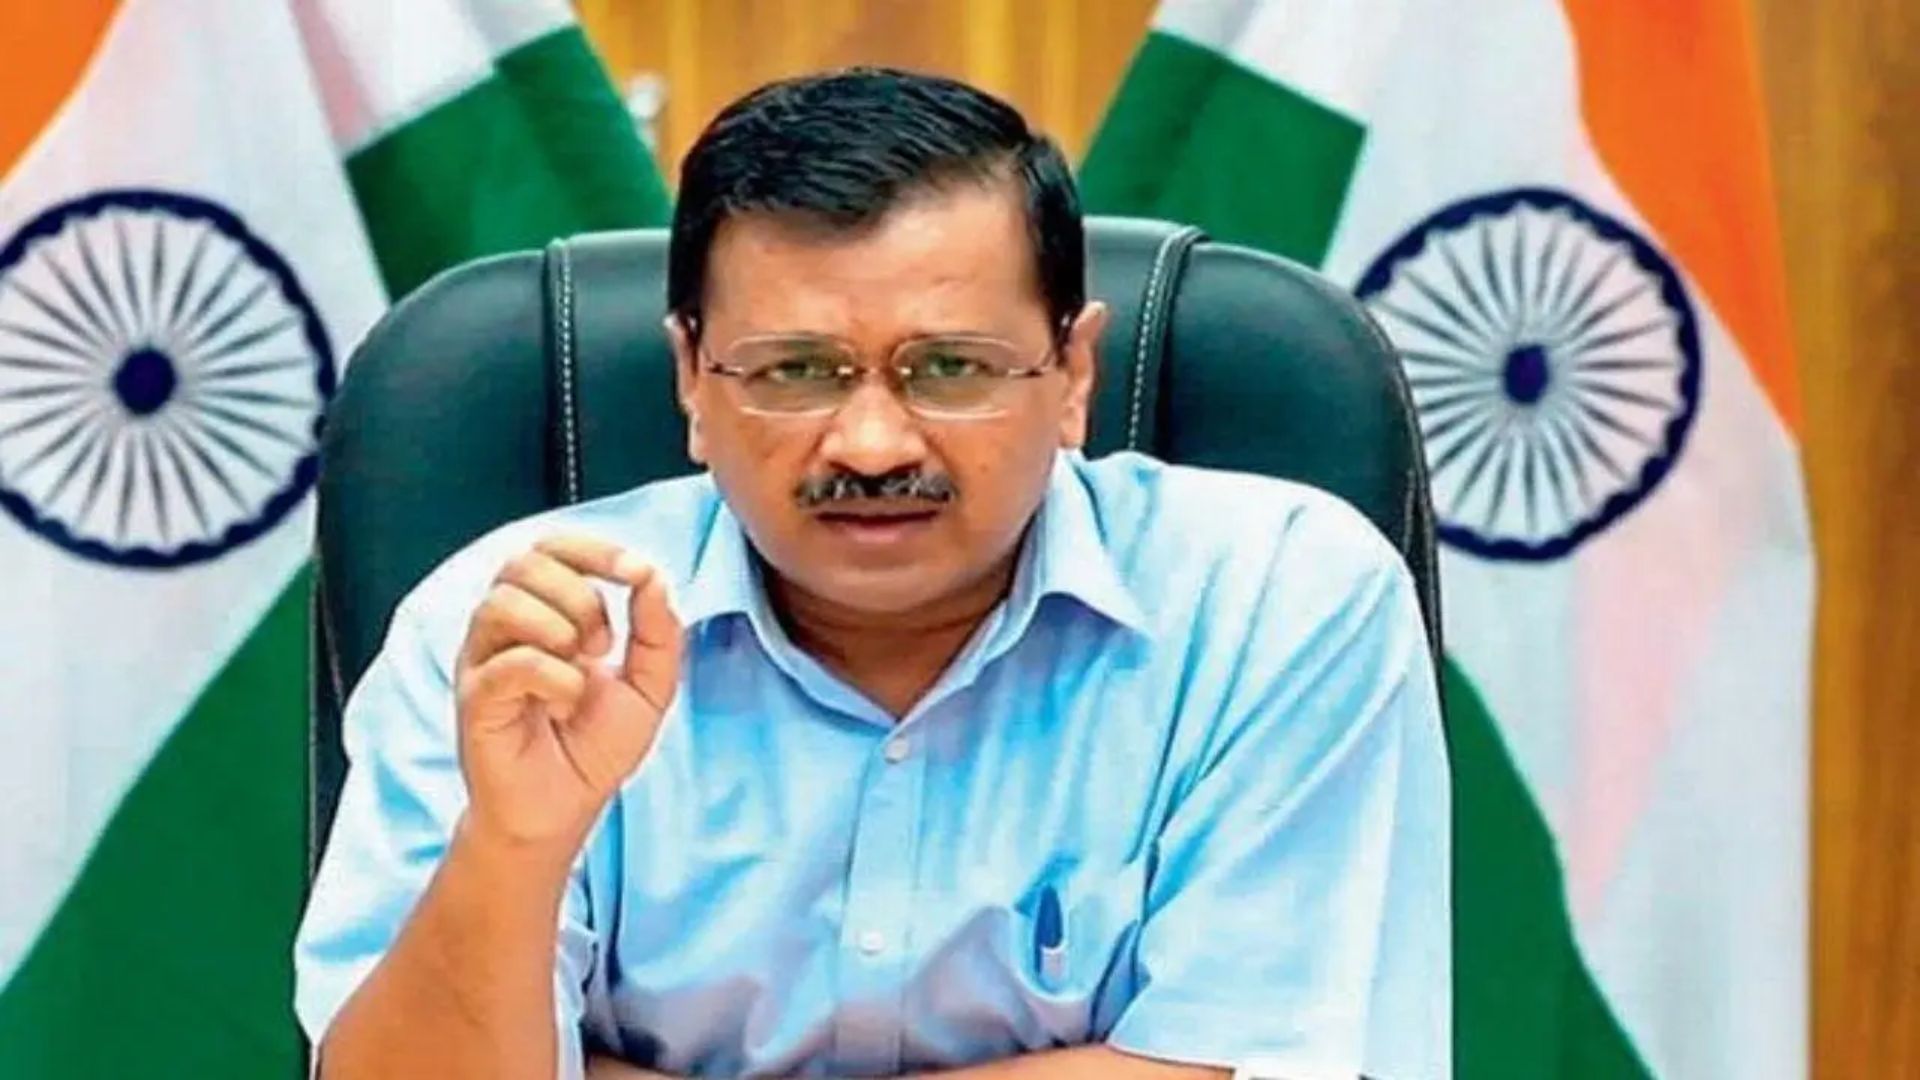 Kejriwal received letter asking him to reserve dates for Ram Mandir inauguration: AAP sources